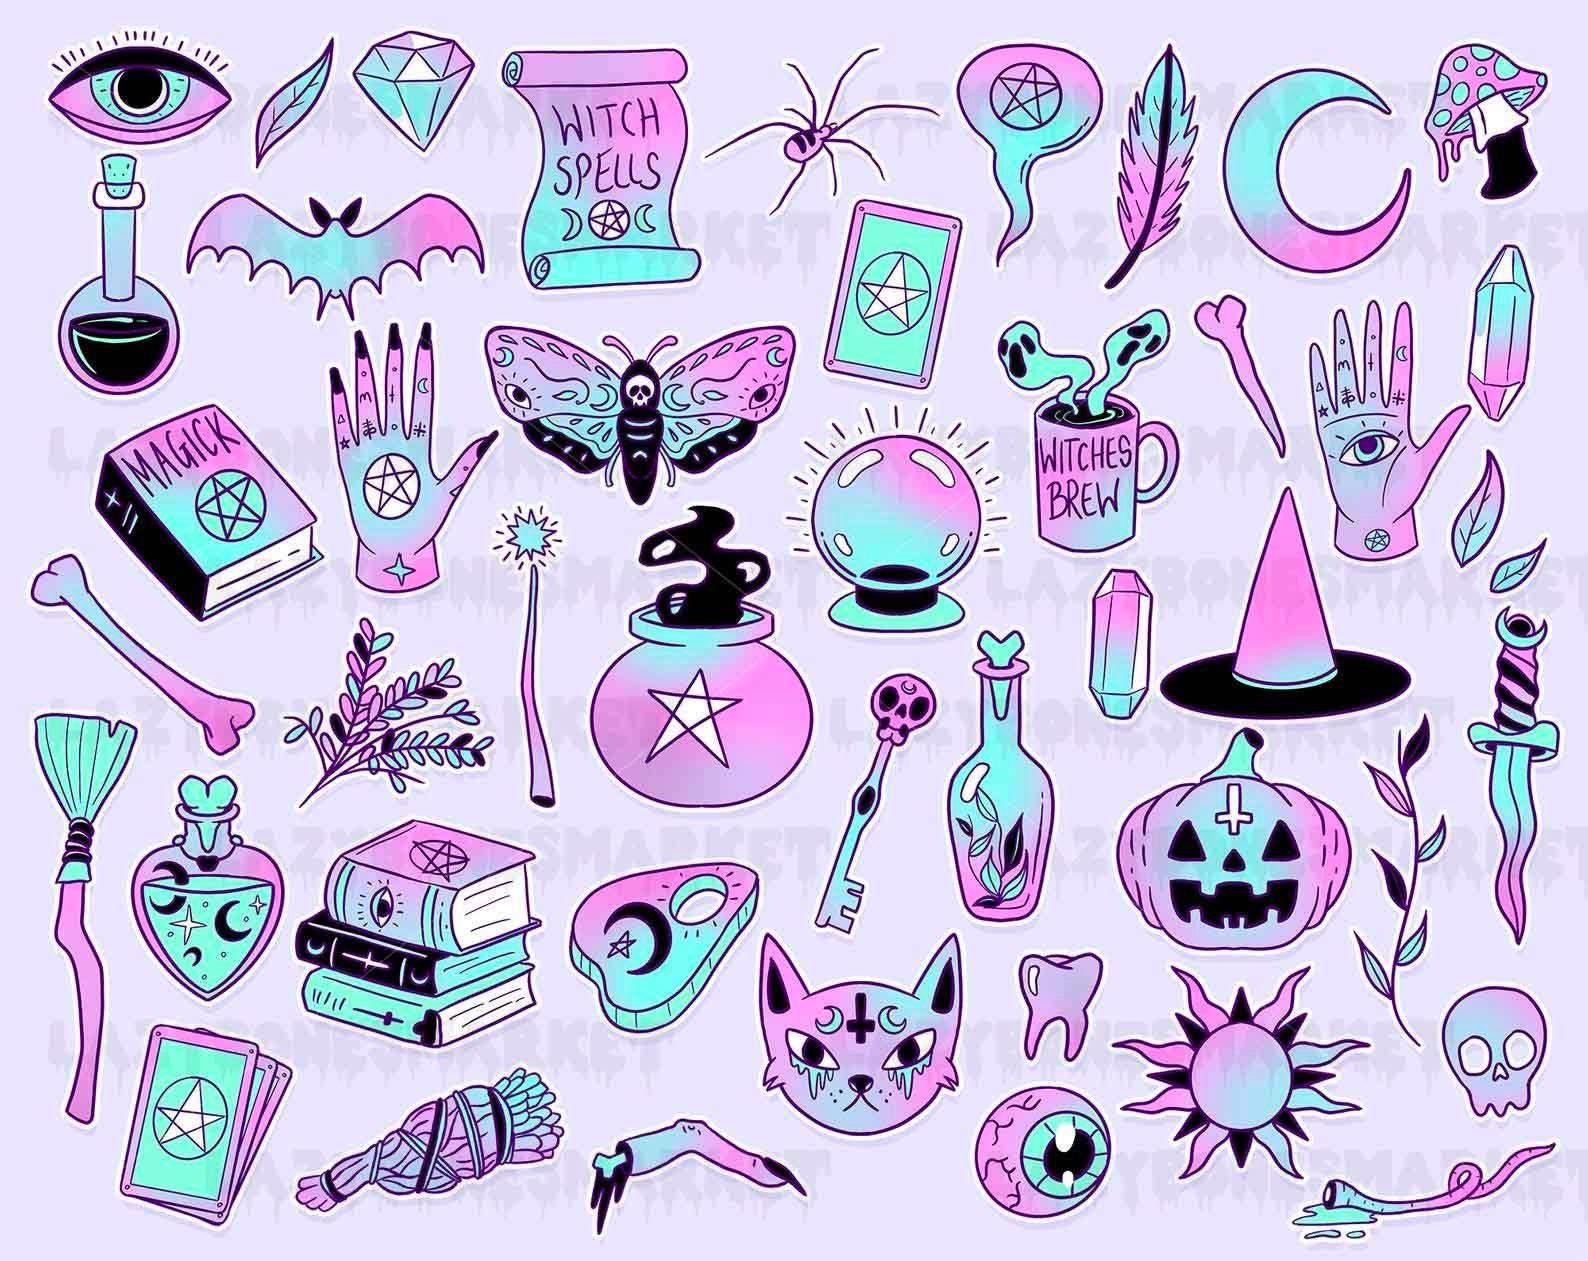 Pastel Witch Aesthetic Wallpaper by NirvanaVoids on DeviantArt